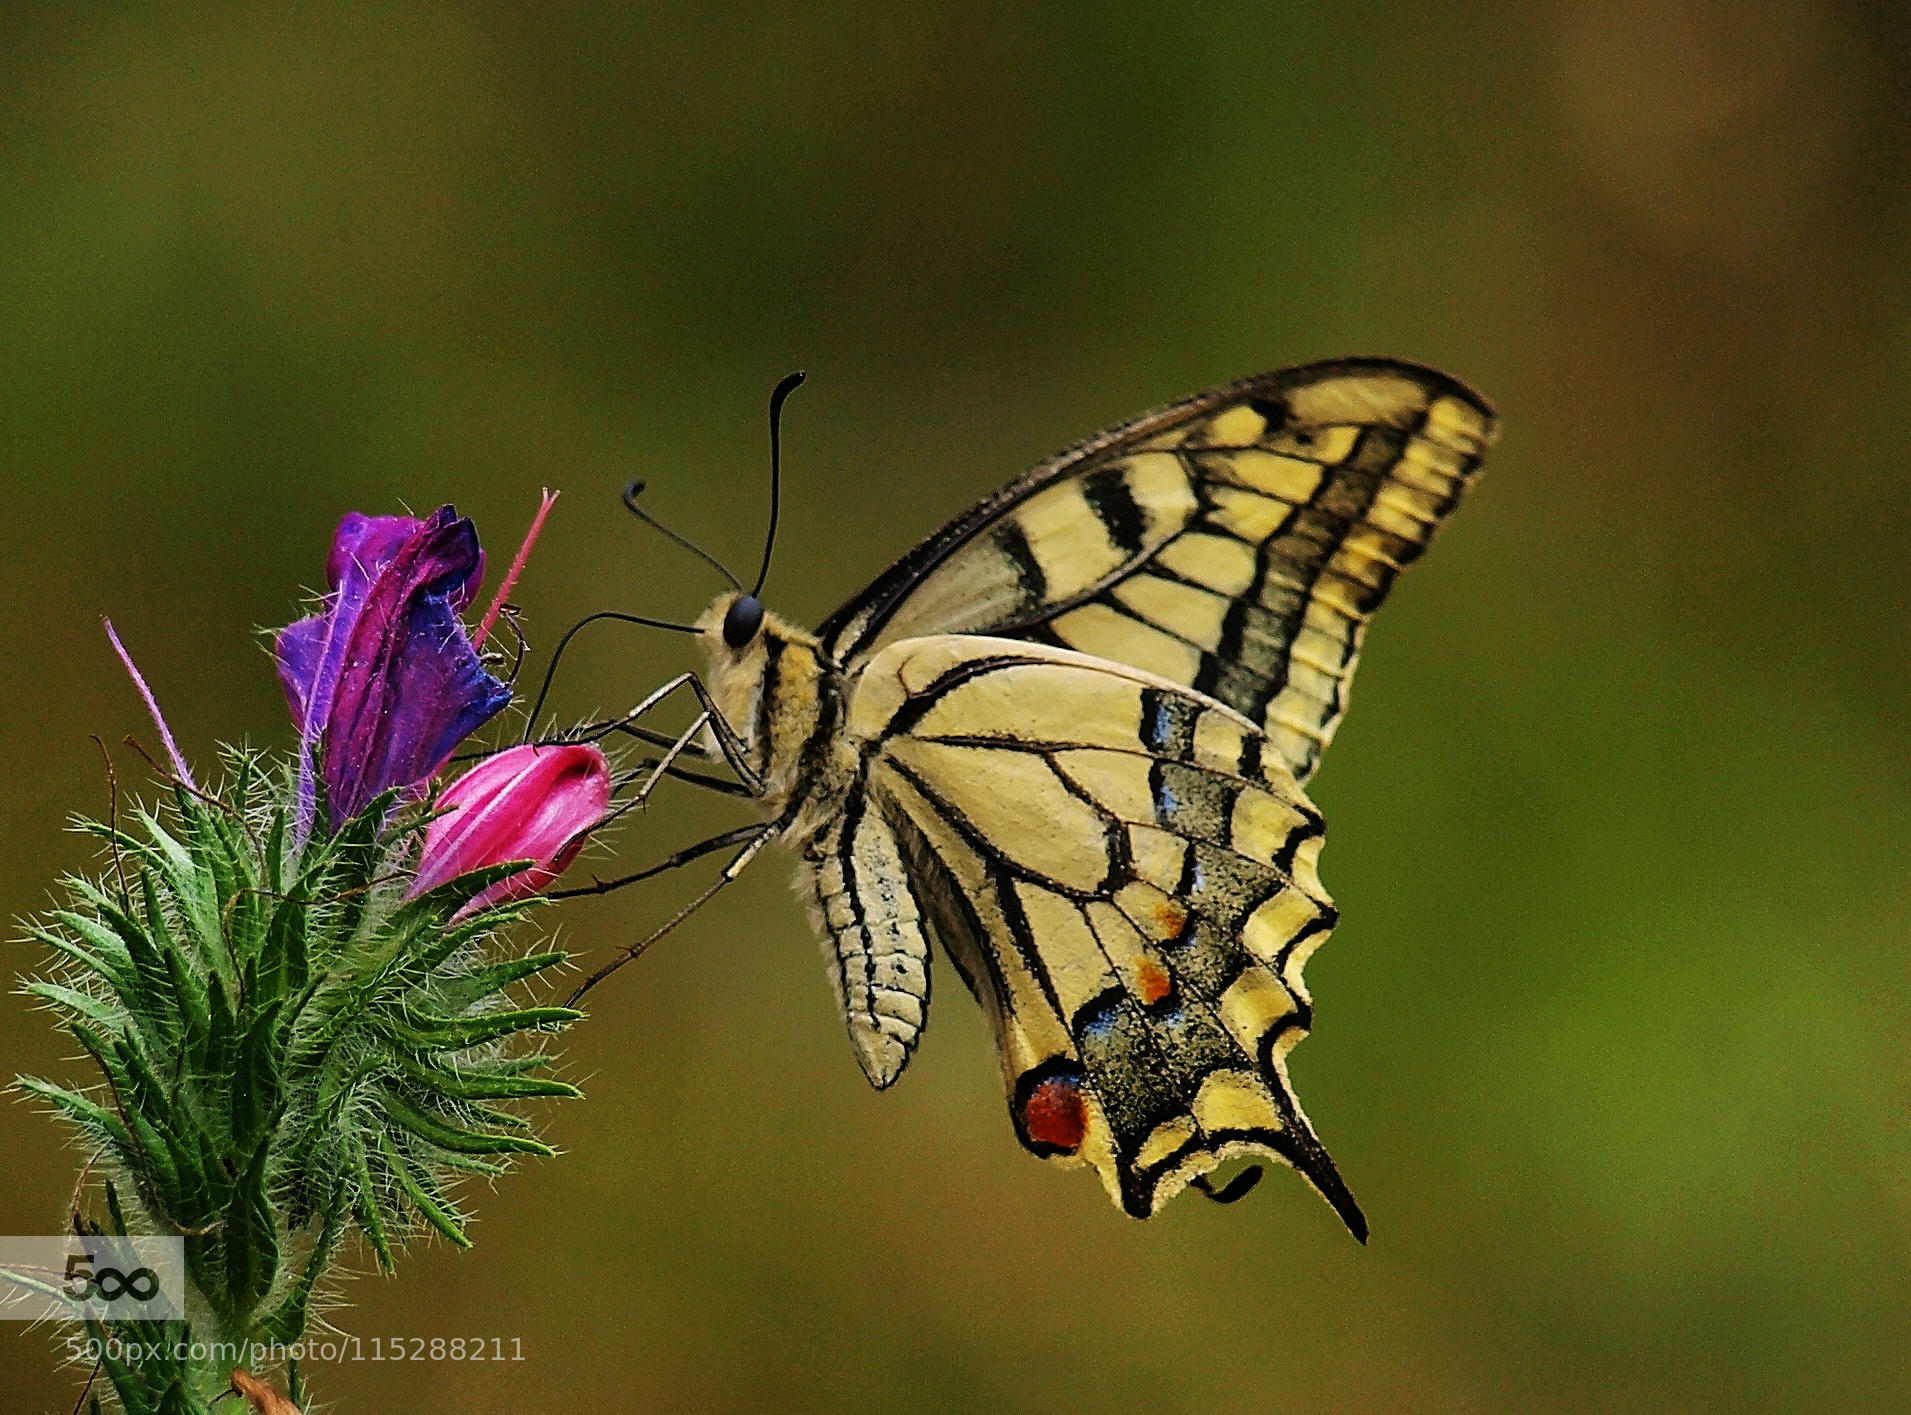 just another Swallowtail :-)